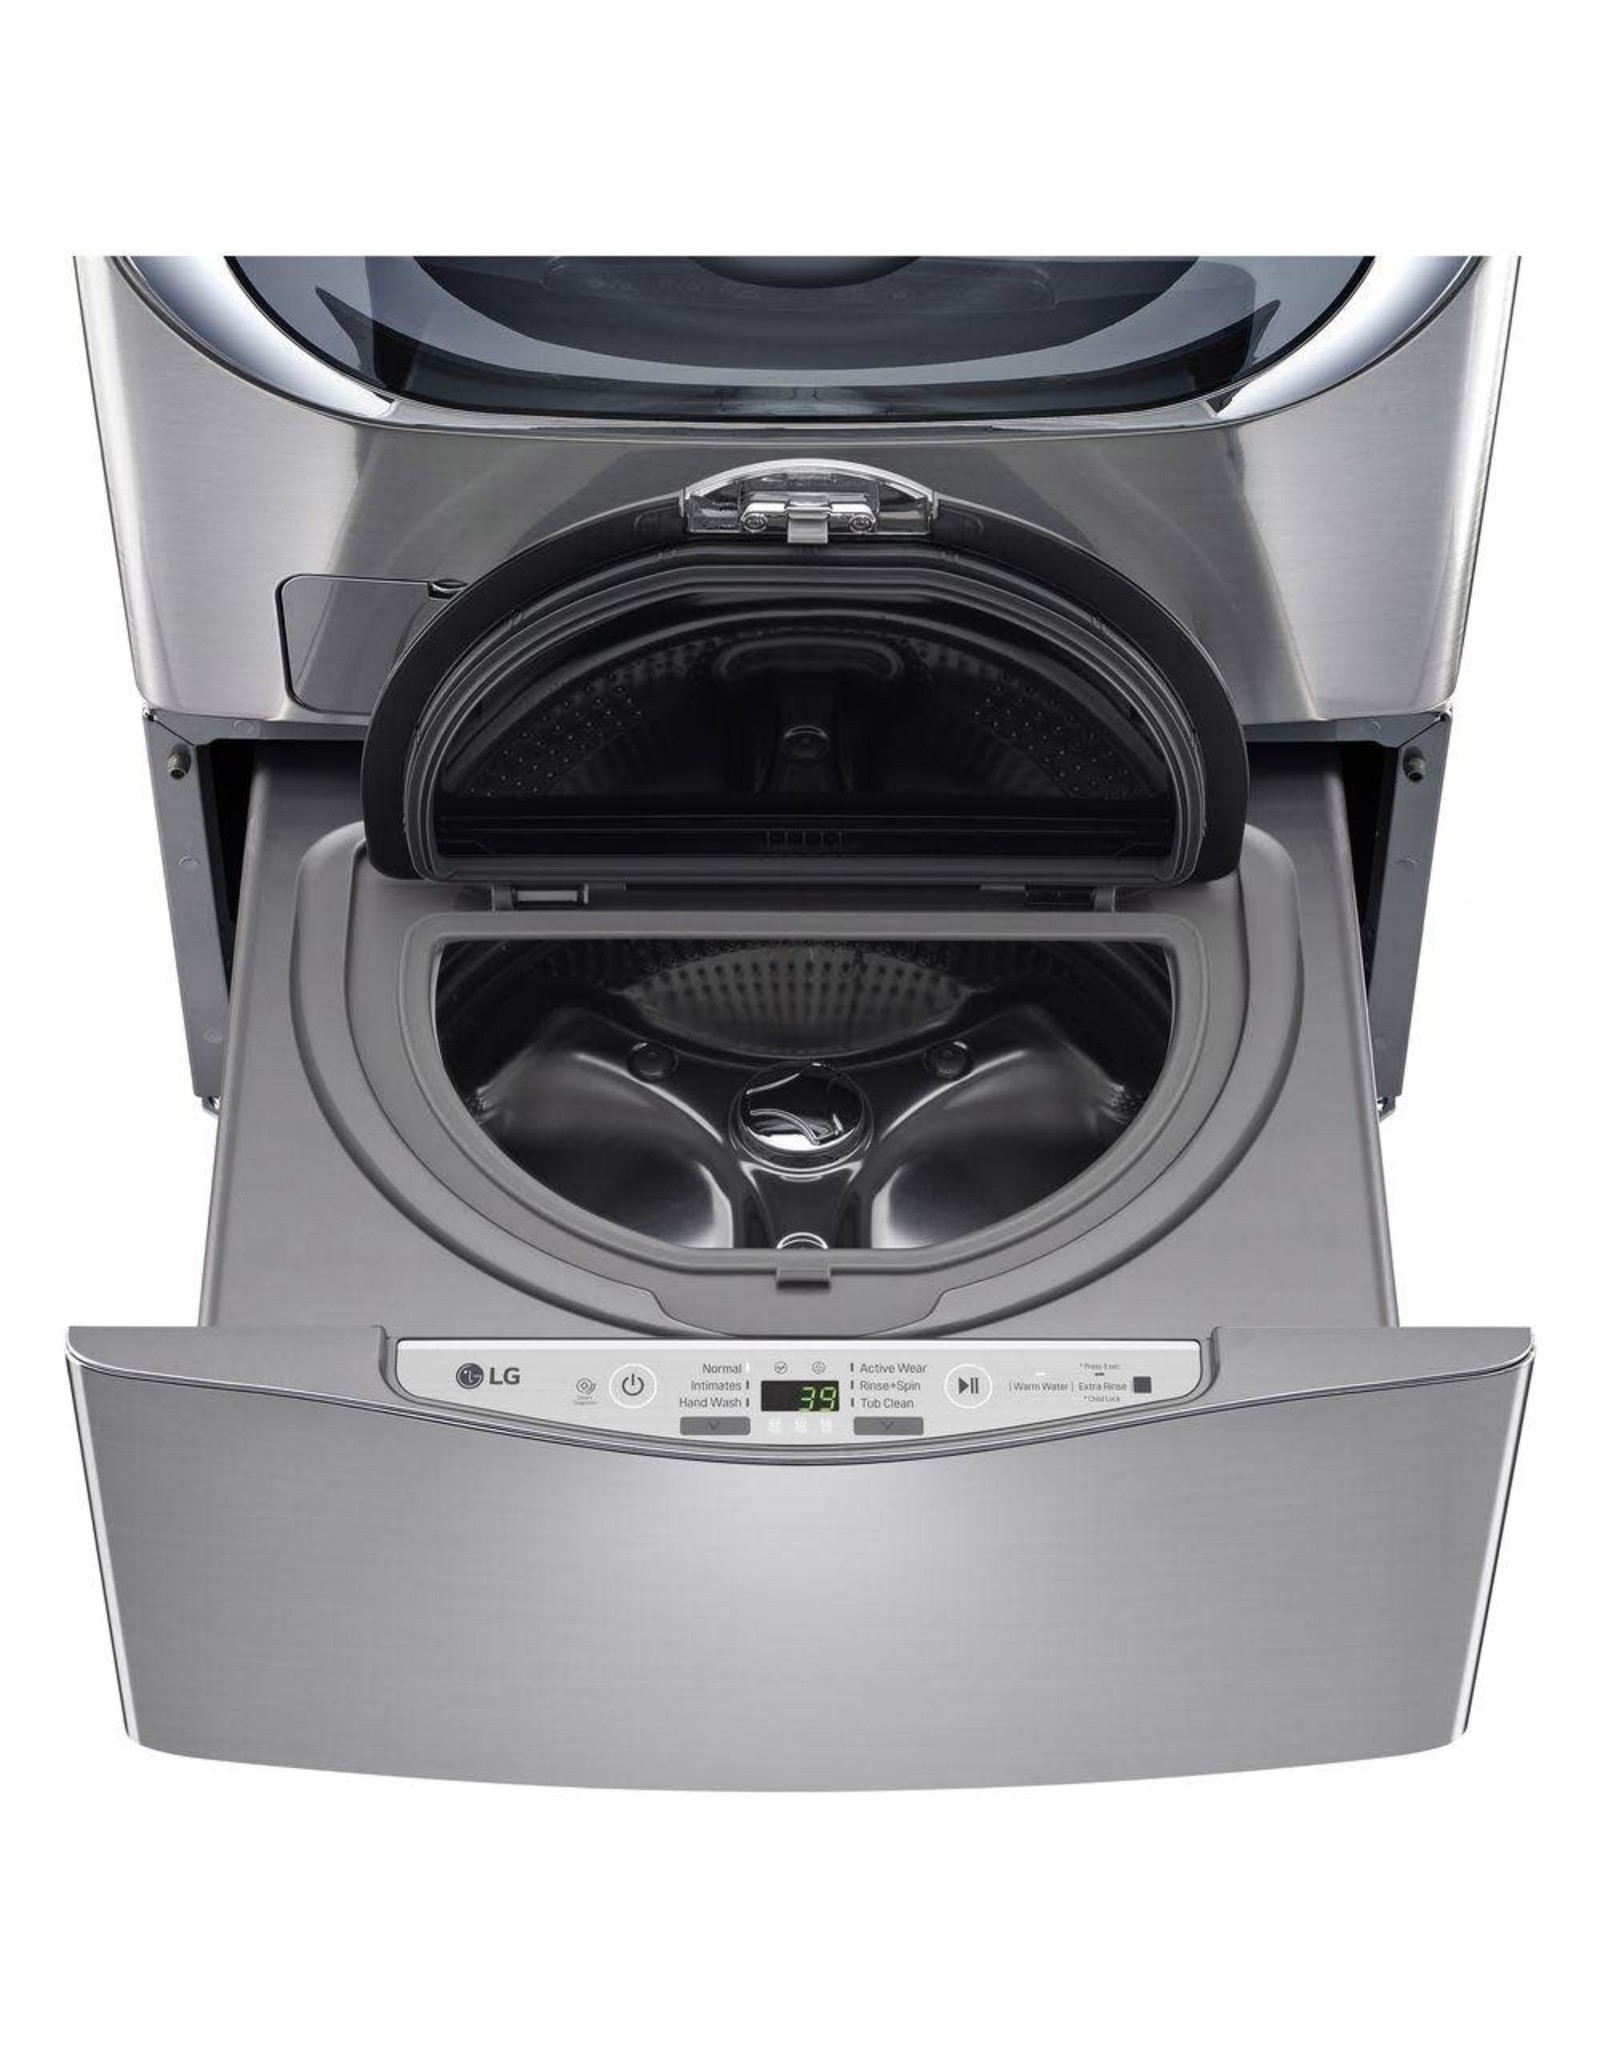 WD200CV 29 in. 1.0 cu. ft. SideKick Pedestal Washer with TWINWash System Compatibility in Graphite Steel